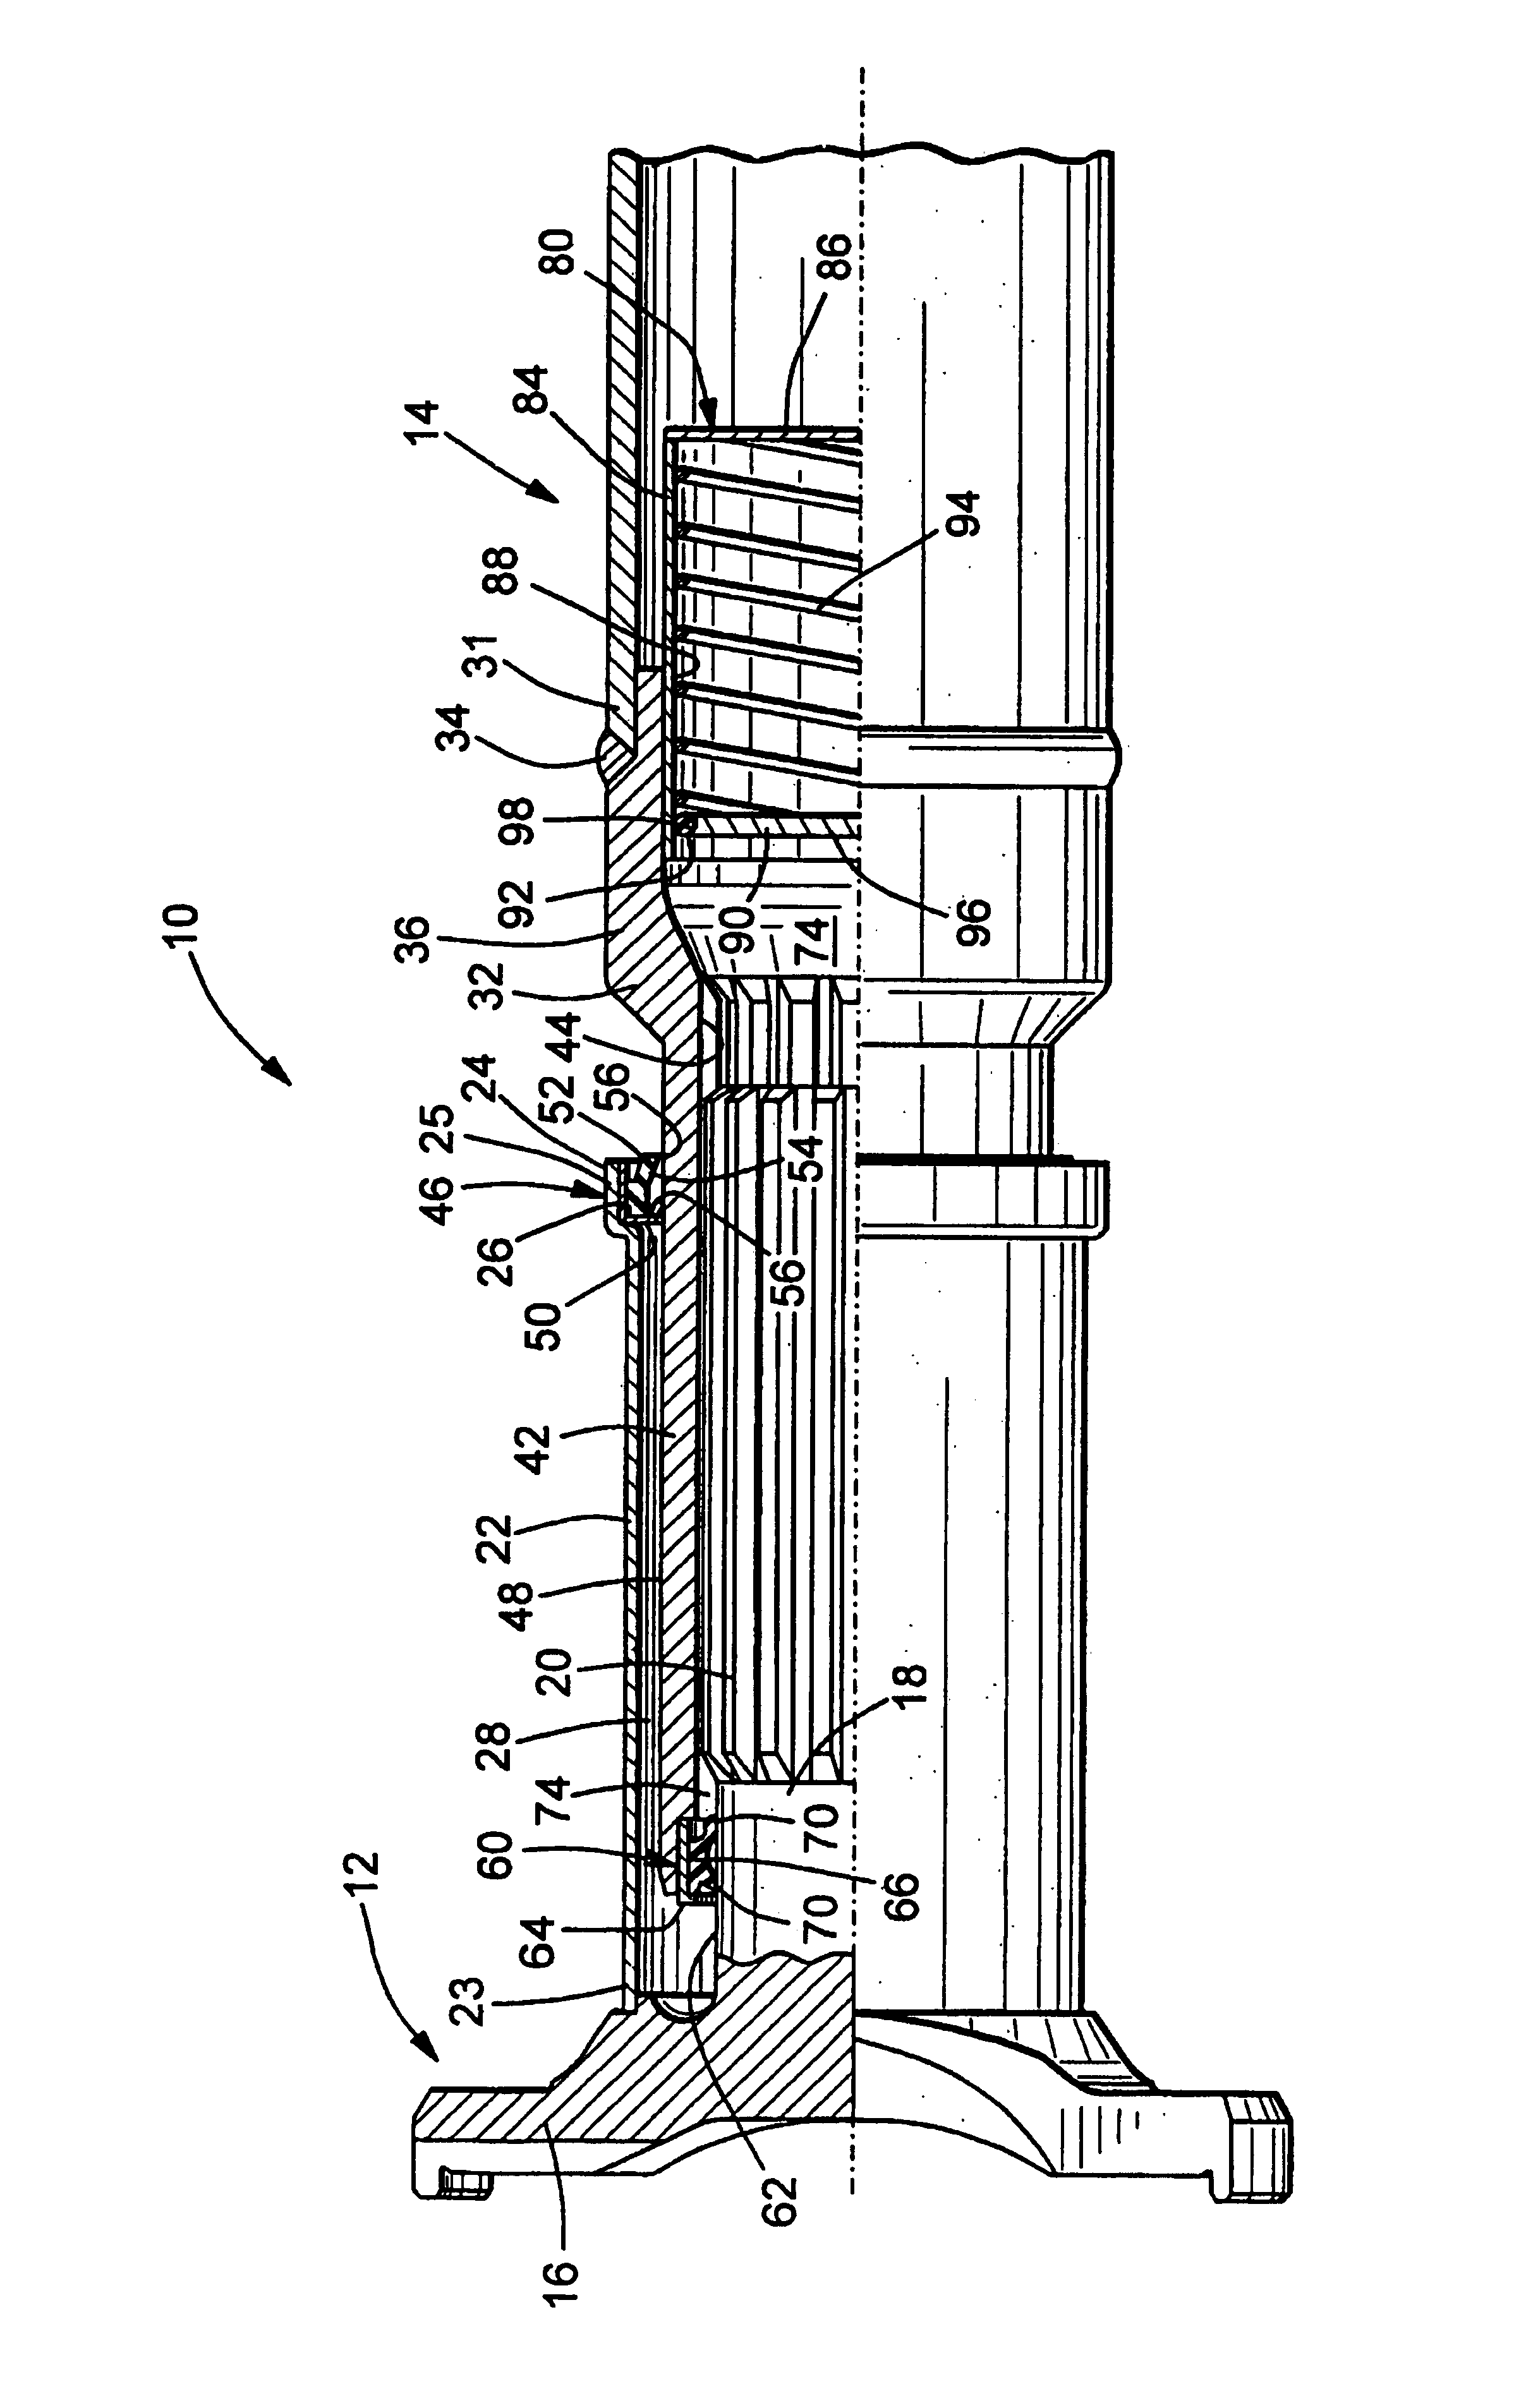 Pressure regulator assembly for use with a slip joint in a driveshaft assembly